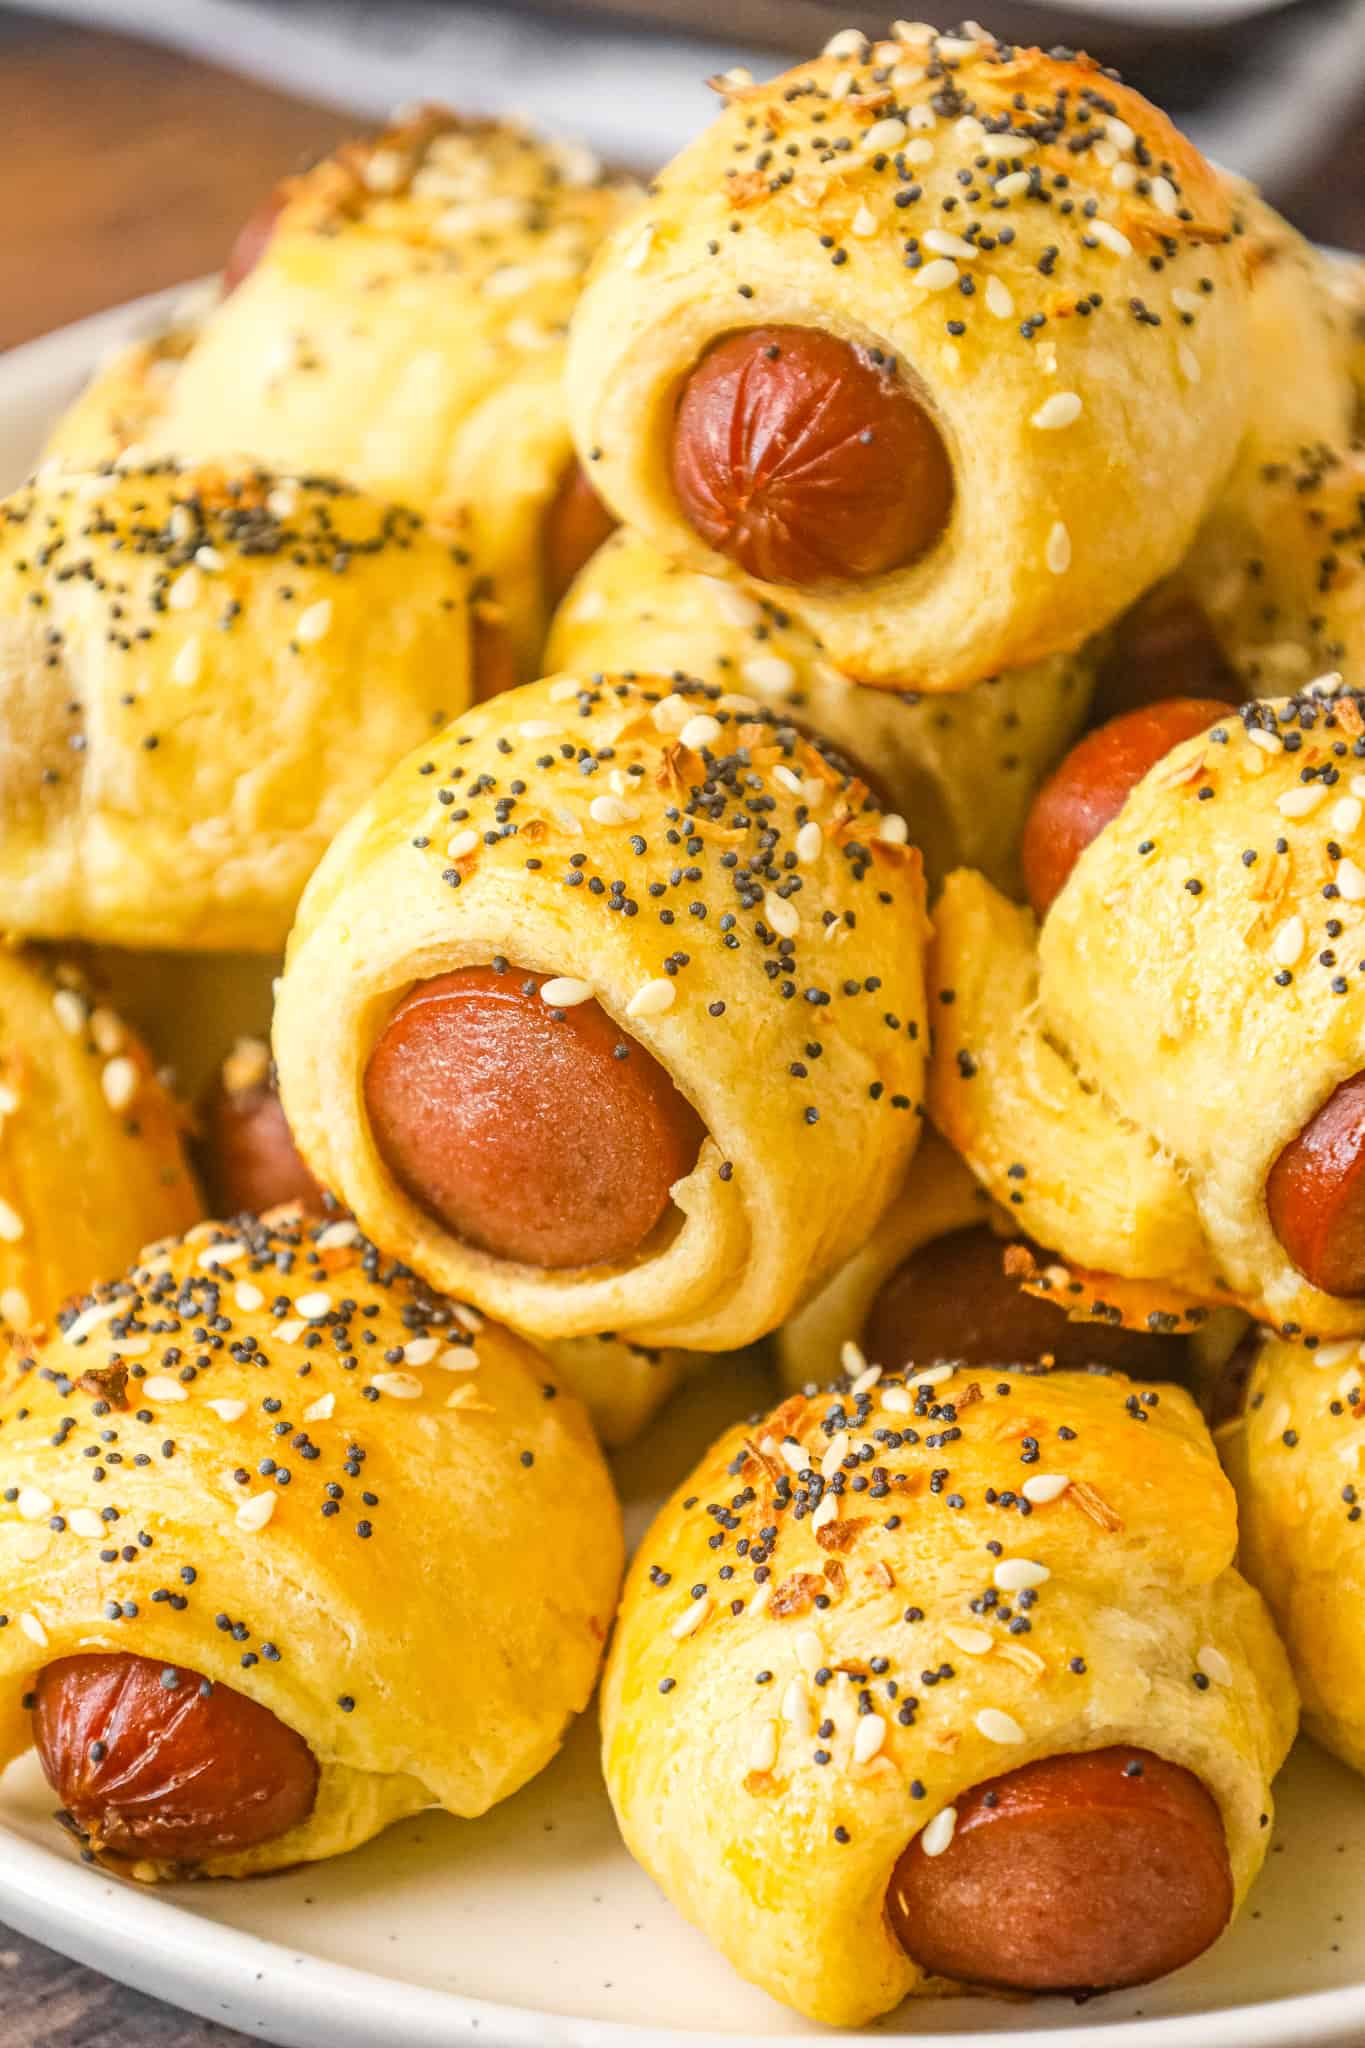 Pigs in a Blanket are a delicious bite sized party food or kid friendly dinner recipe using wieners and Pillsbury crescent roll dough topped with poppy seeds, sesame seeds and dehydrated minced onions.